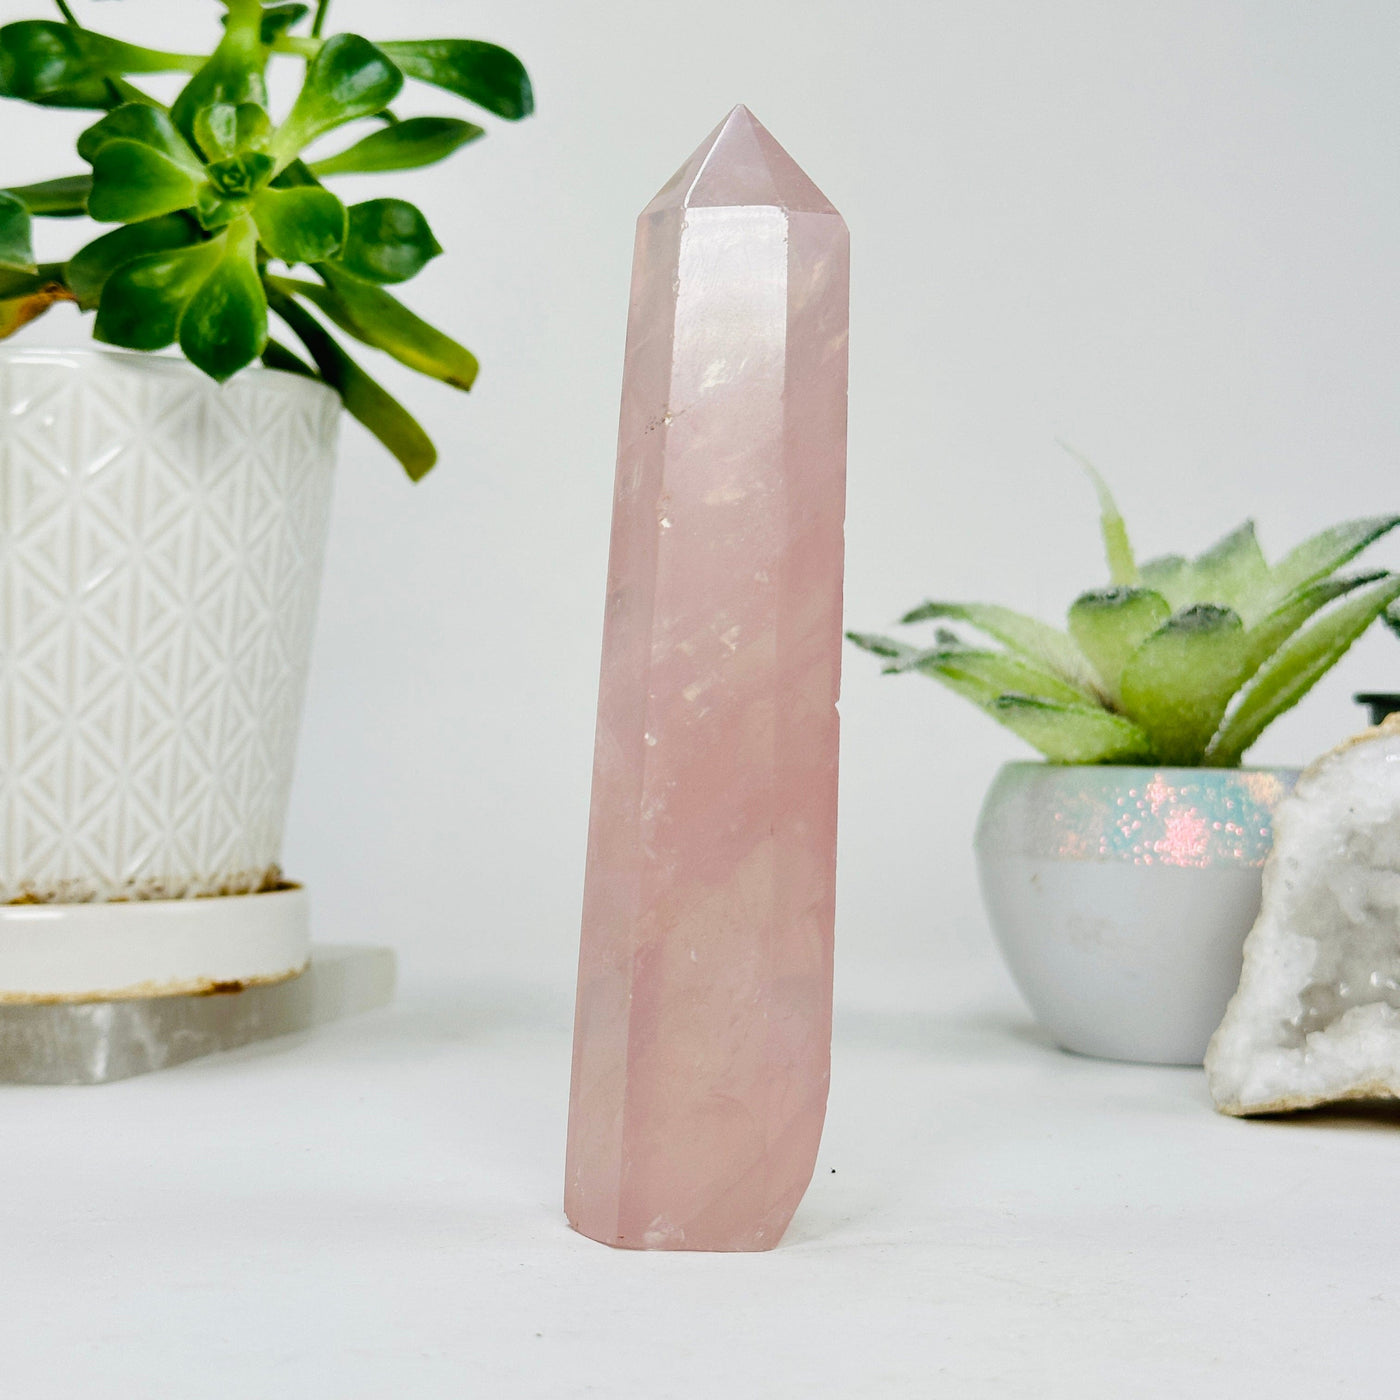 rose quartz polished point with decorations in the background